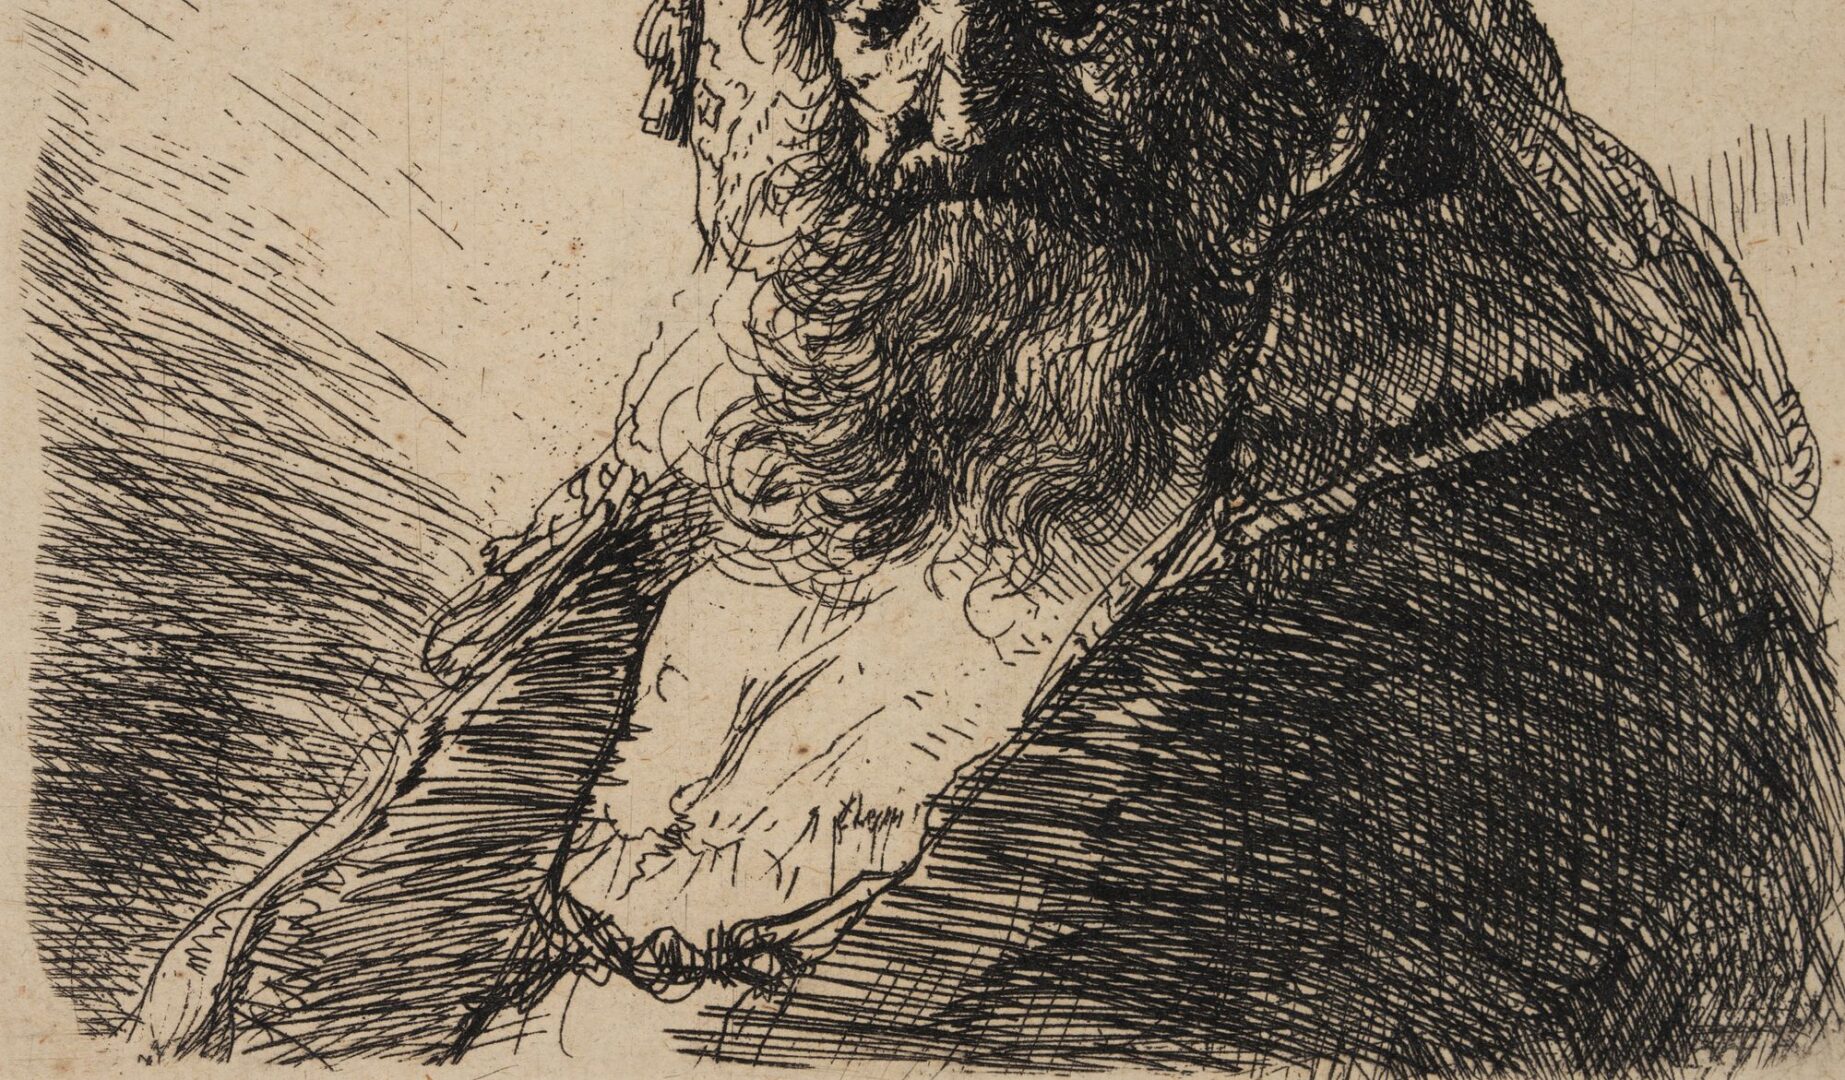 Lot 116: Rembrandt Etching, Old Bearded Man in a High Fur Cap, with Eyes Closed